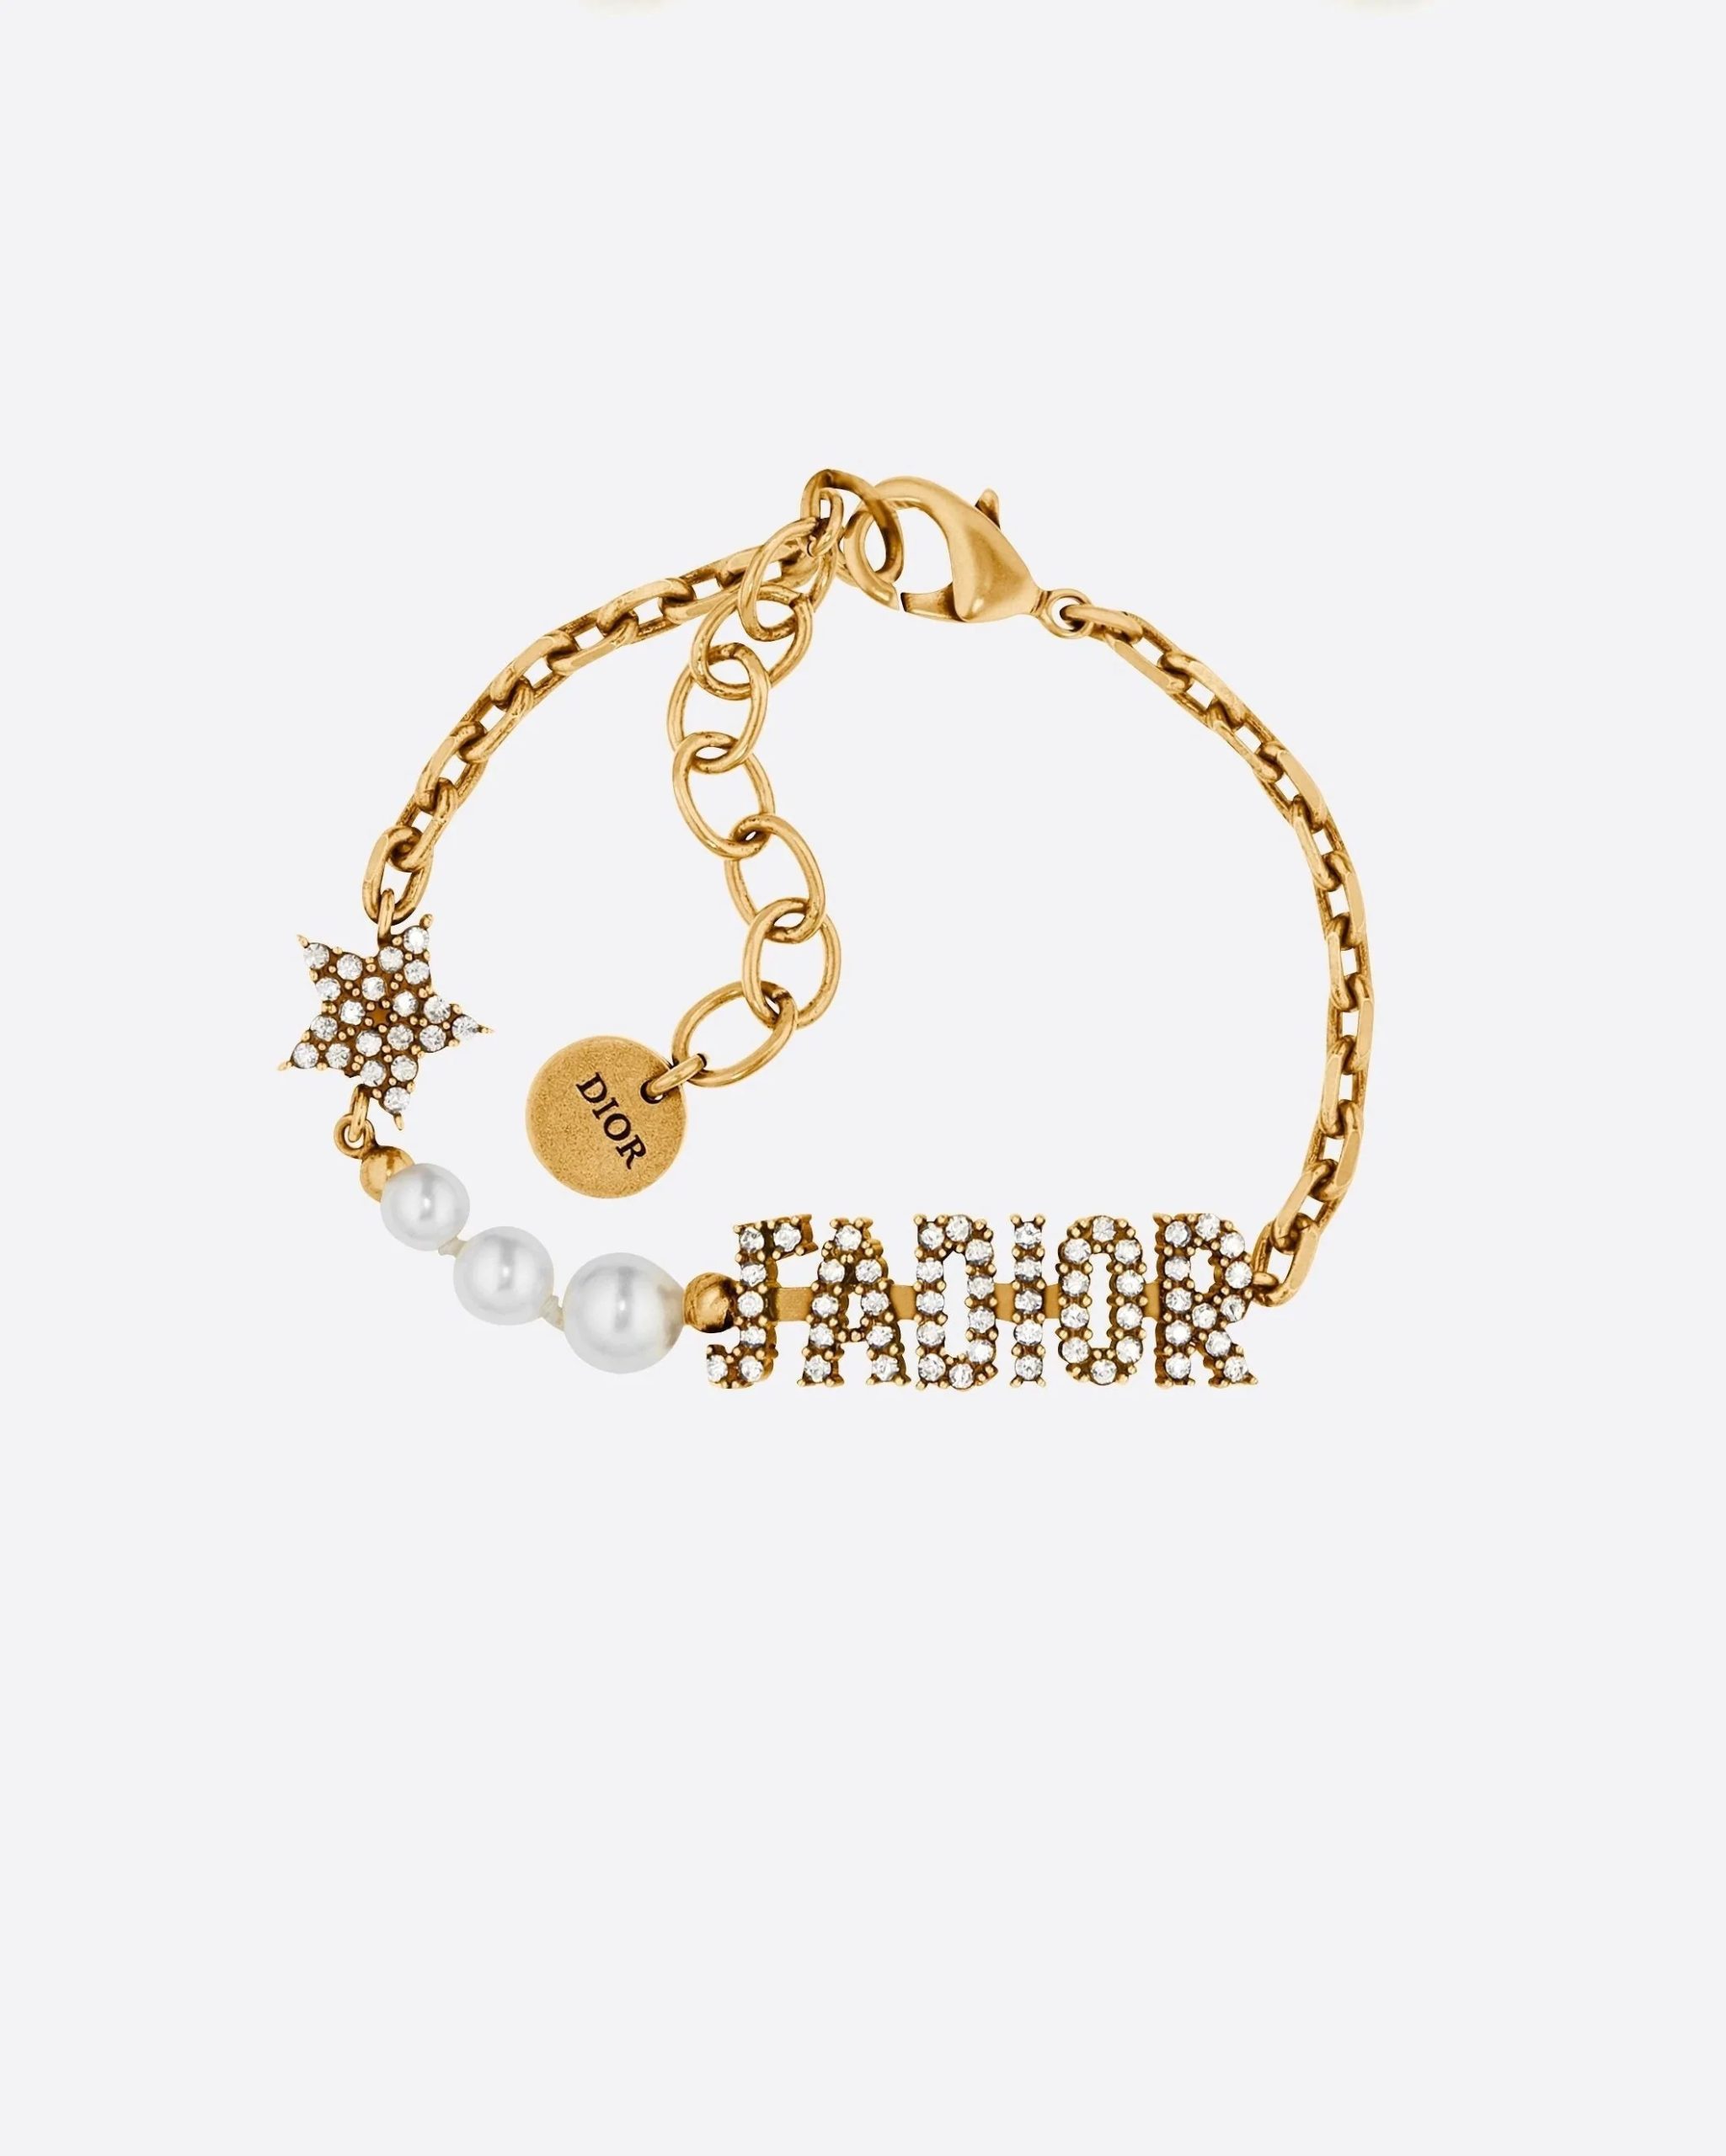 Dior J'Adior Bracelet Antique Gold Metal, White Resin Pearls and Crystals